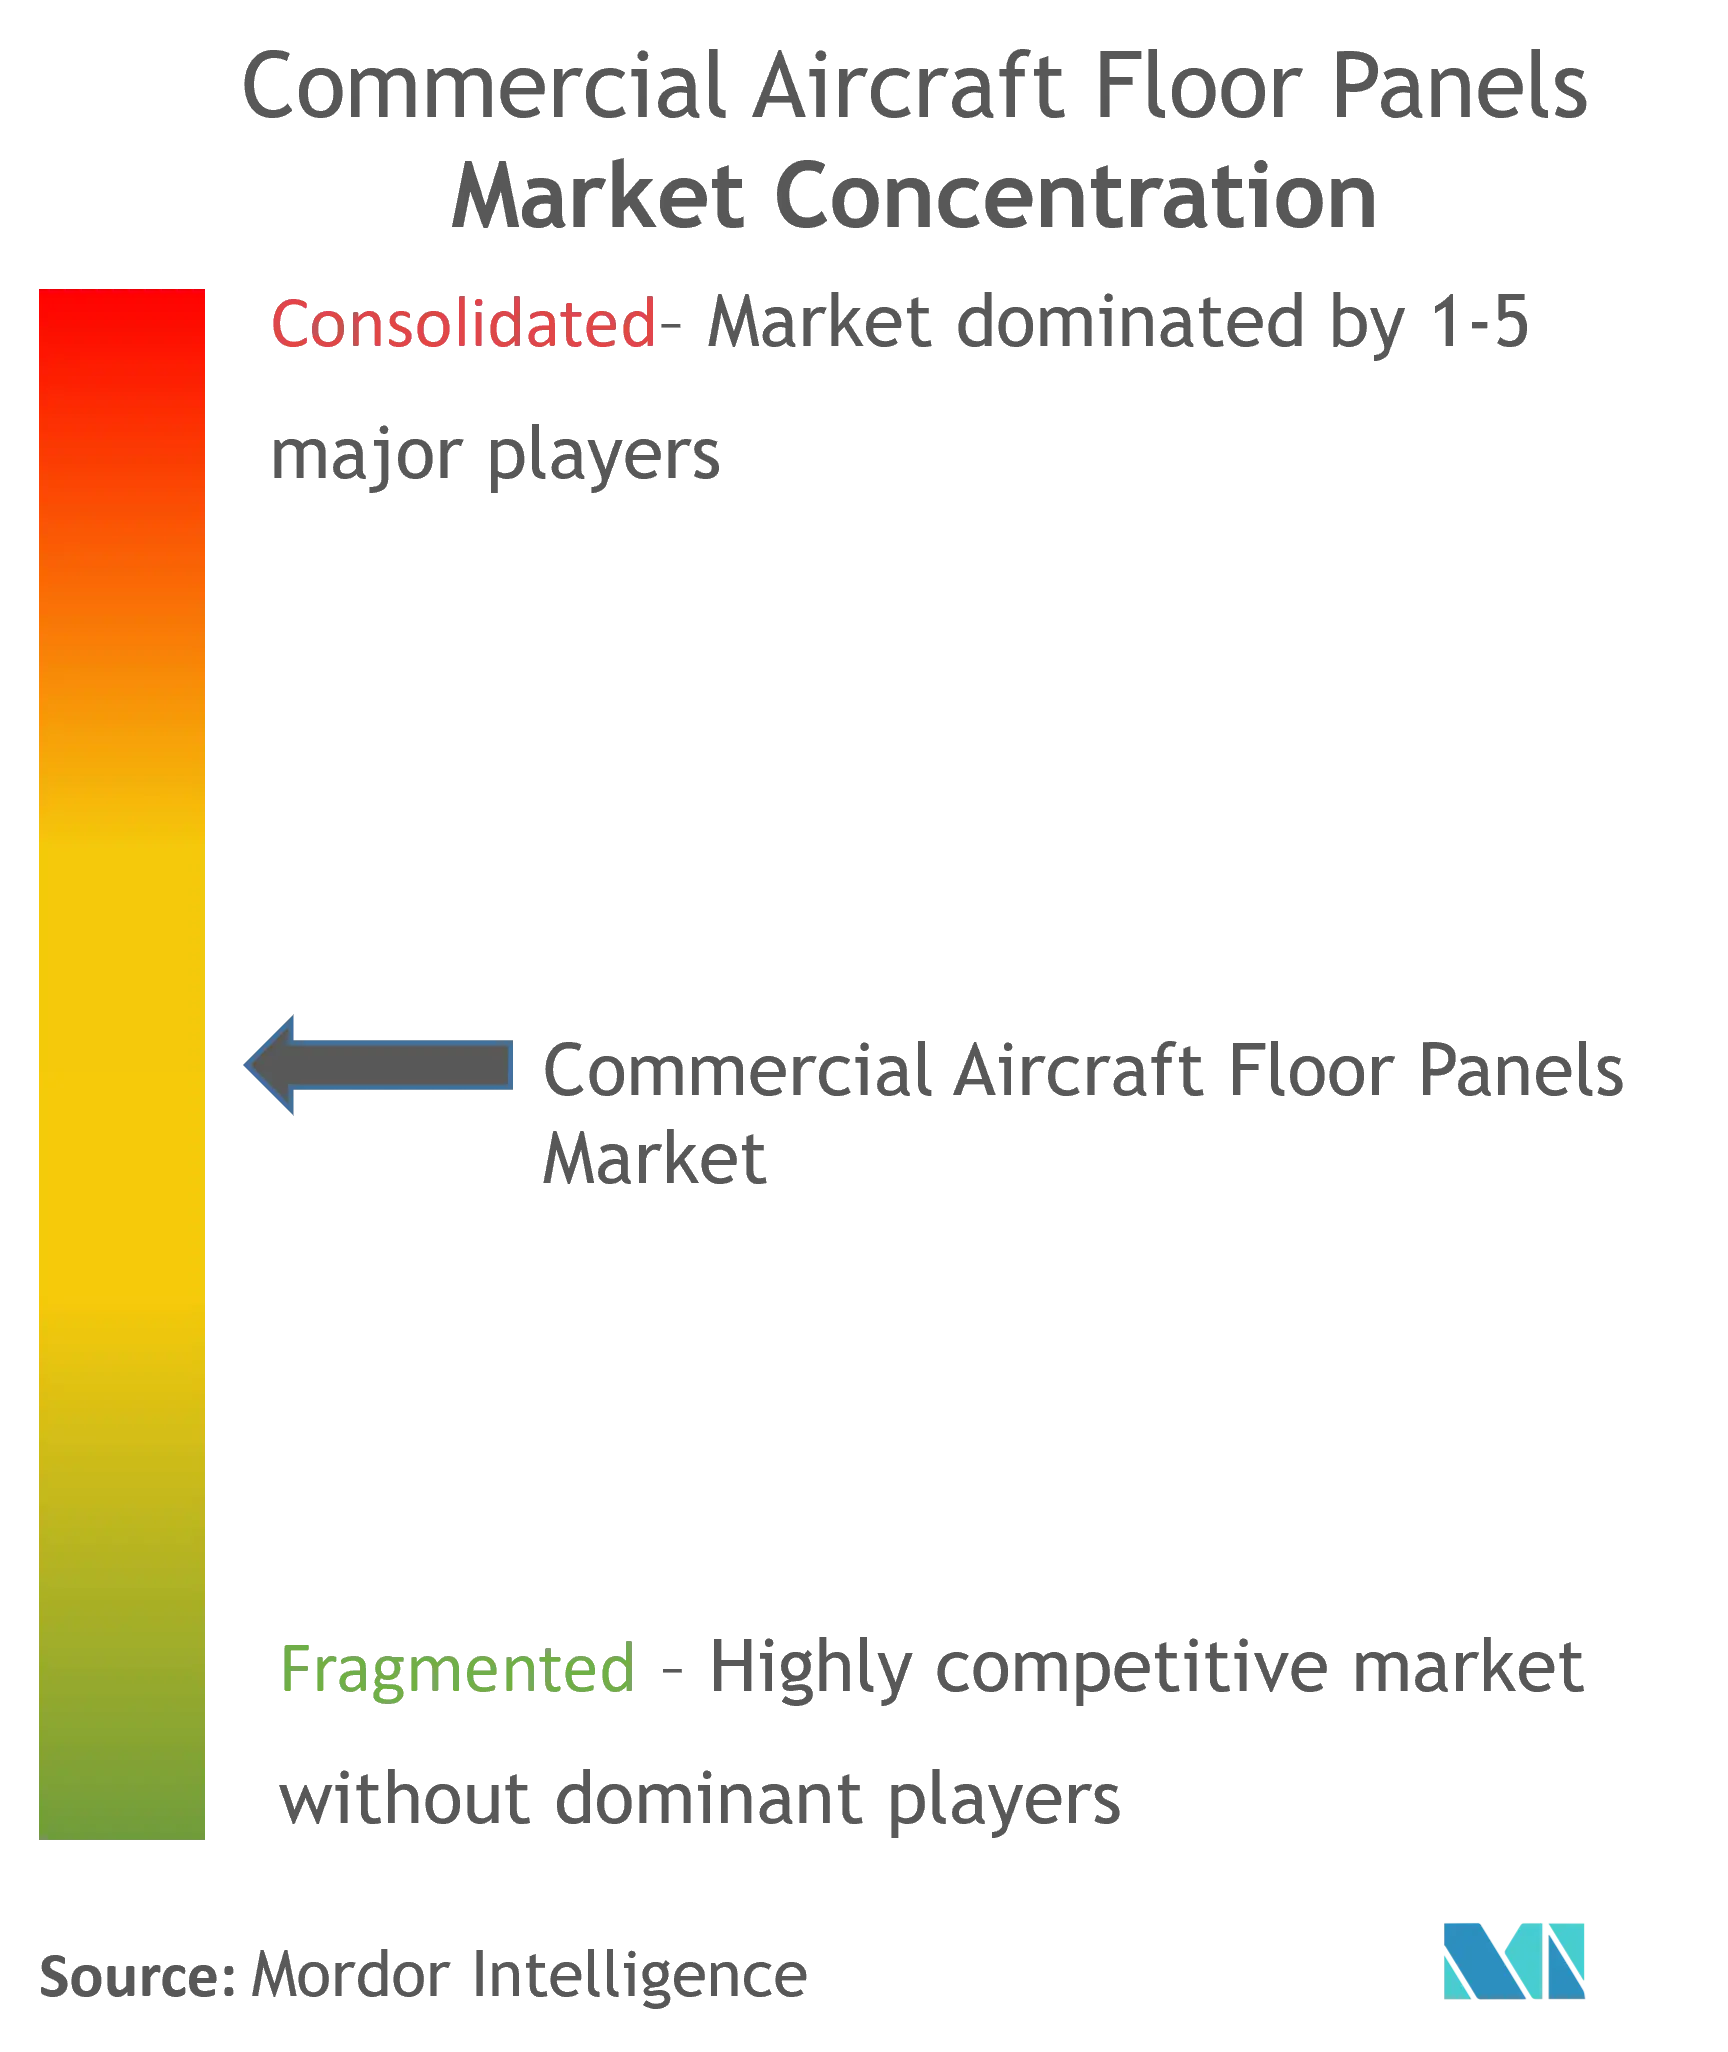 Commercial Aircraft Floor Panels Market Concentration